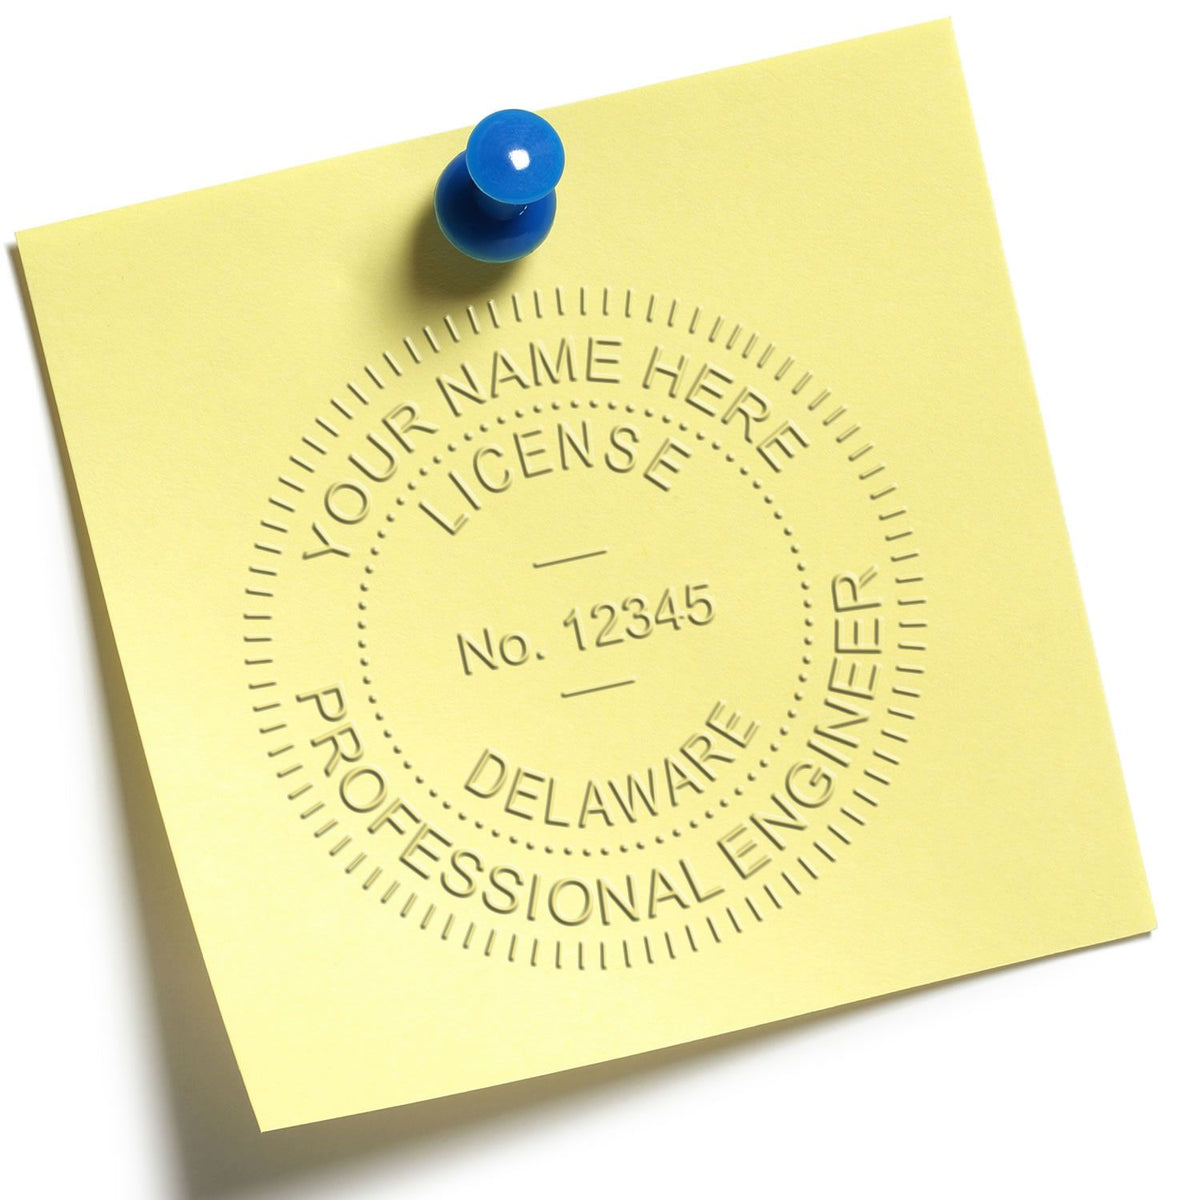 An alternative view of the Long Reach Delaware PE Seal stamped on a sheet of paper showing the image in use